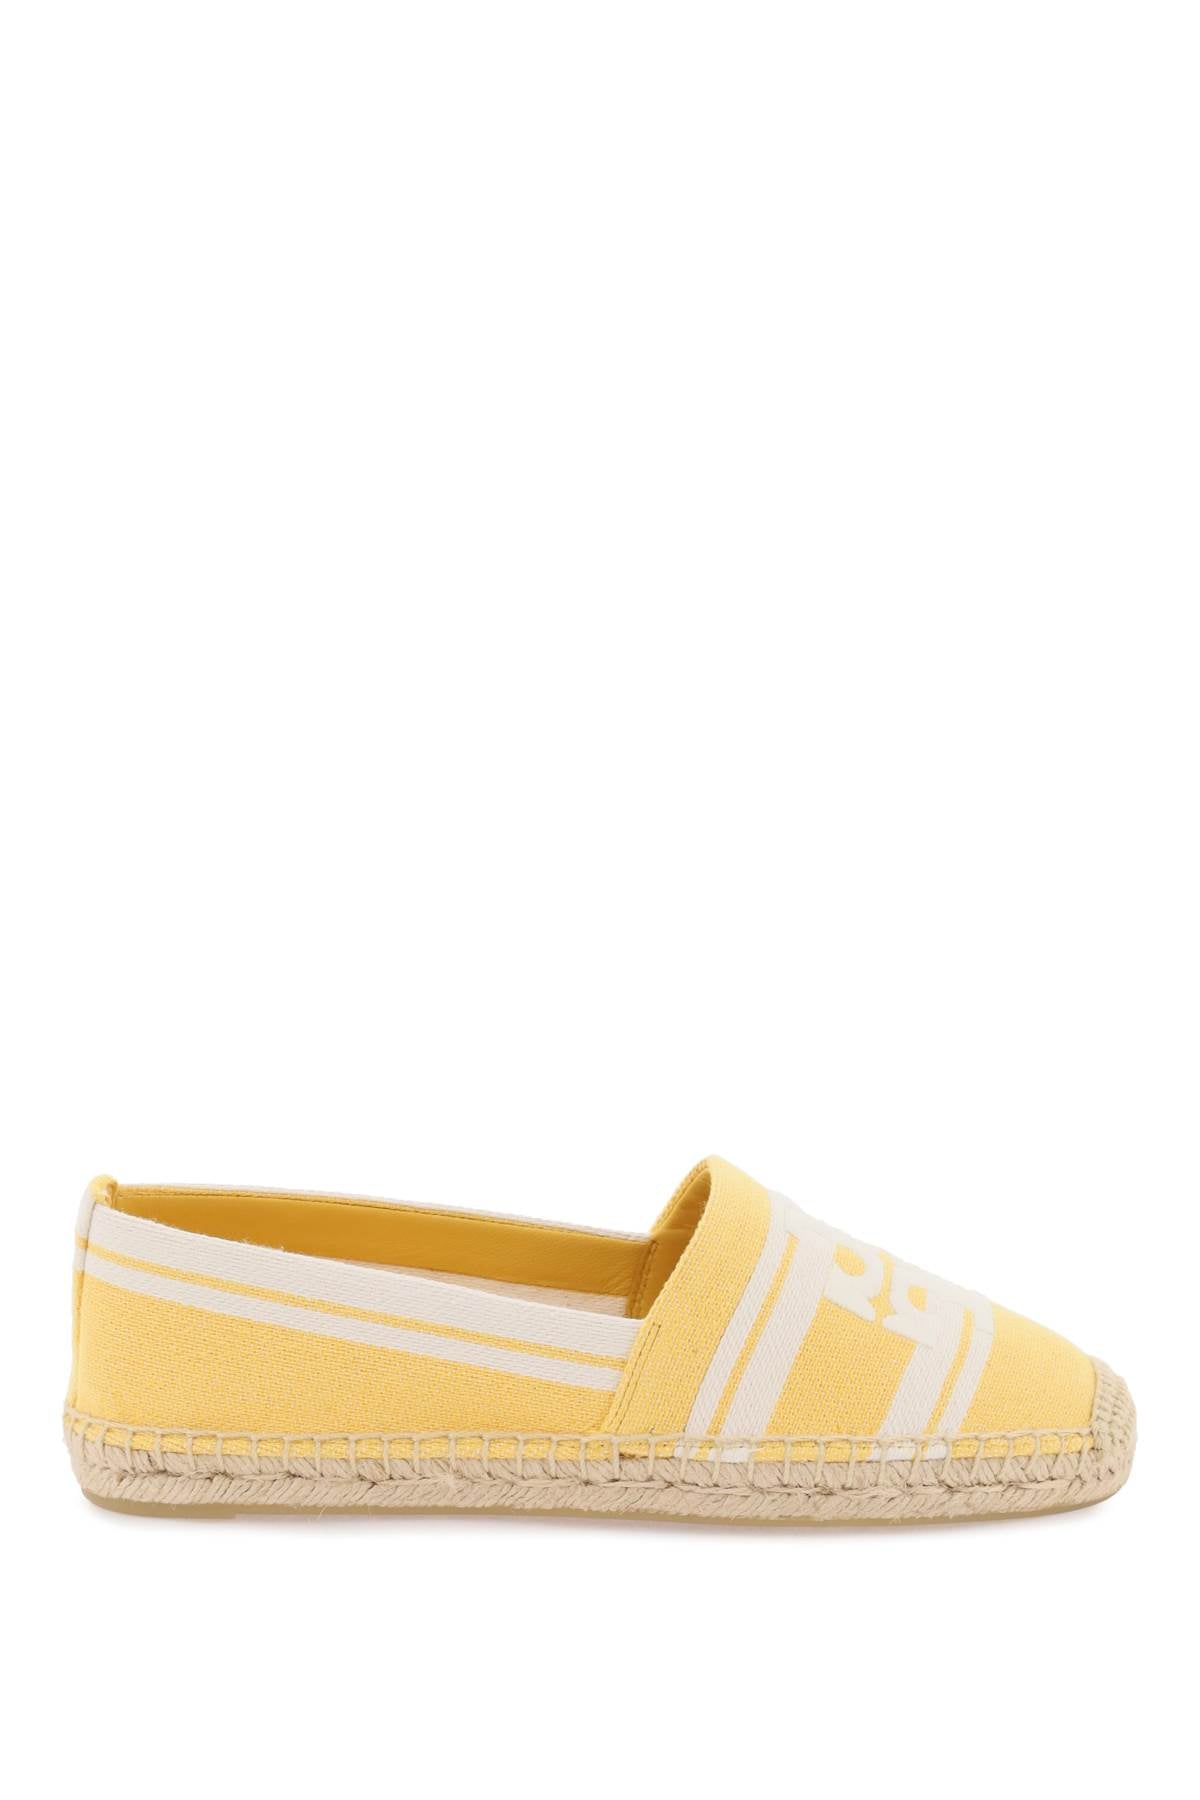 Tory burch striped espadrilles with double t-0